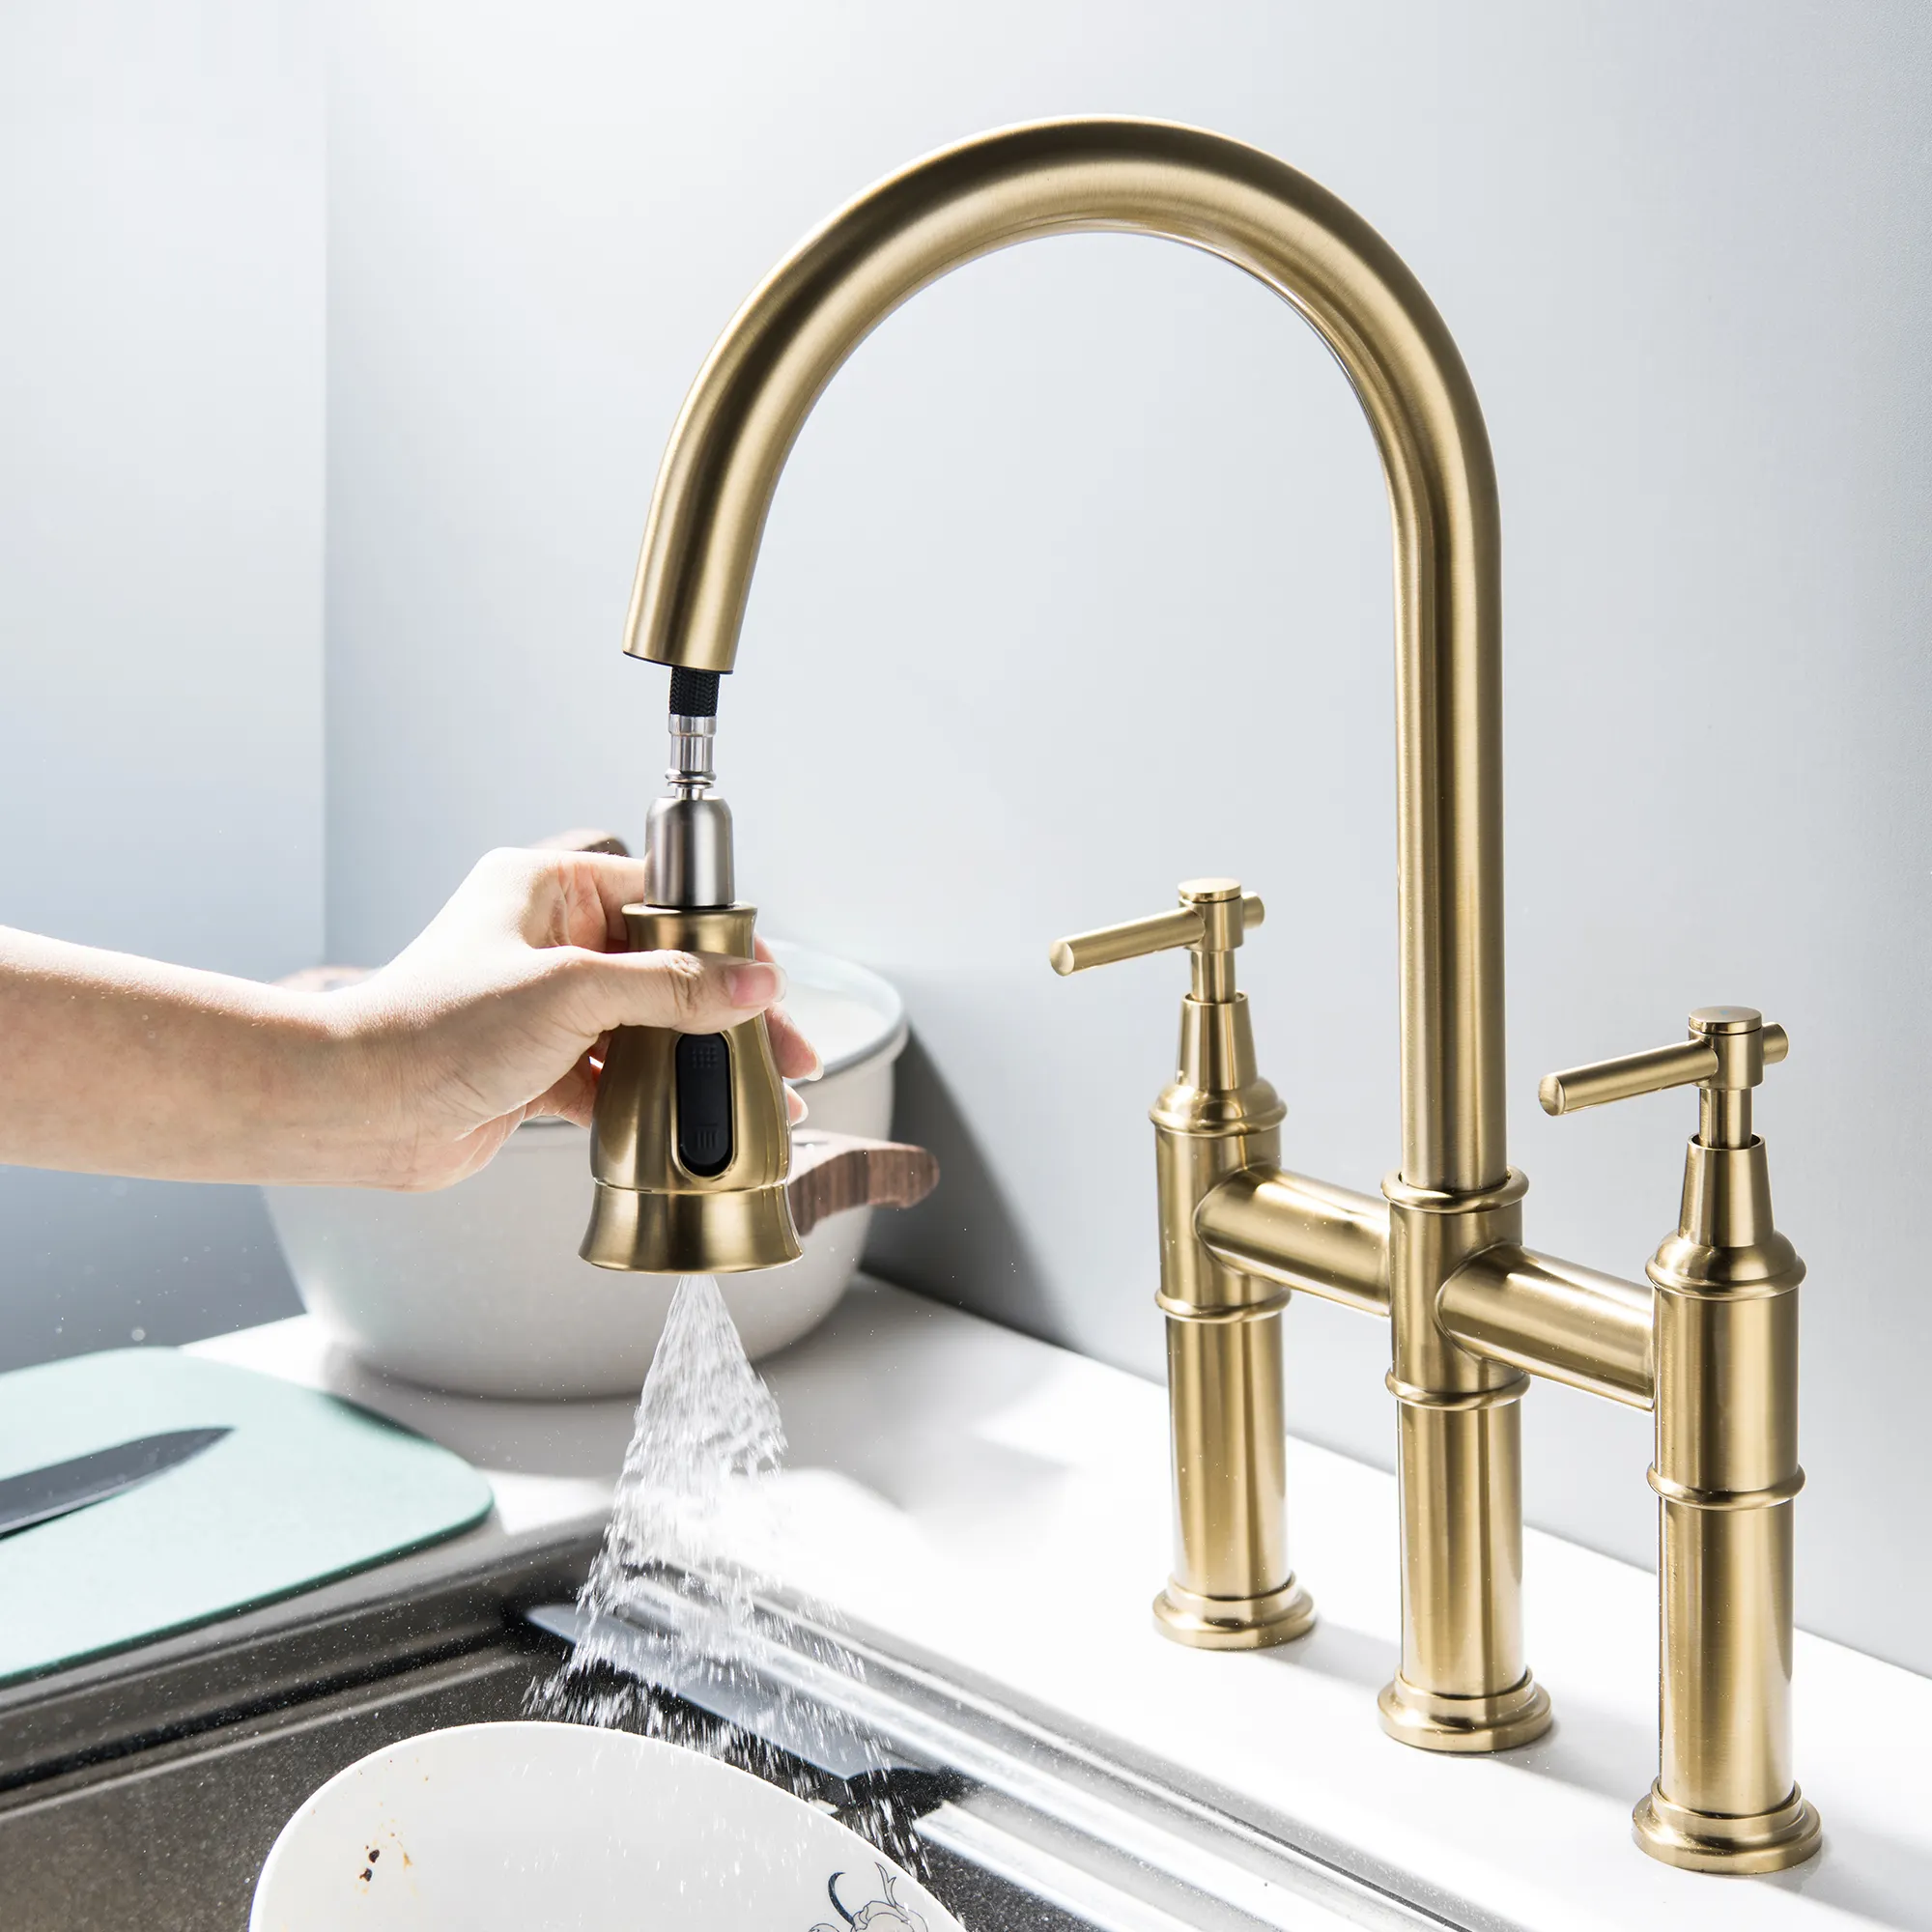 High quality brass brushed gold double handle pull out kitchen sink basin mixer faucet